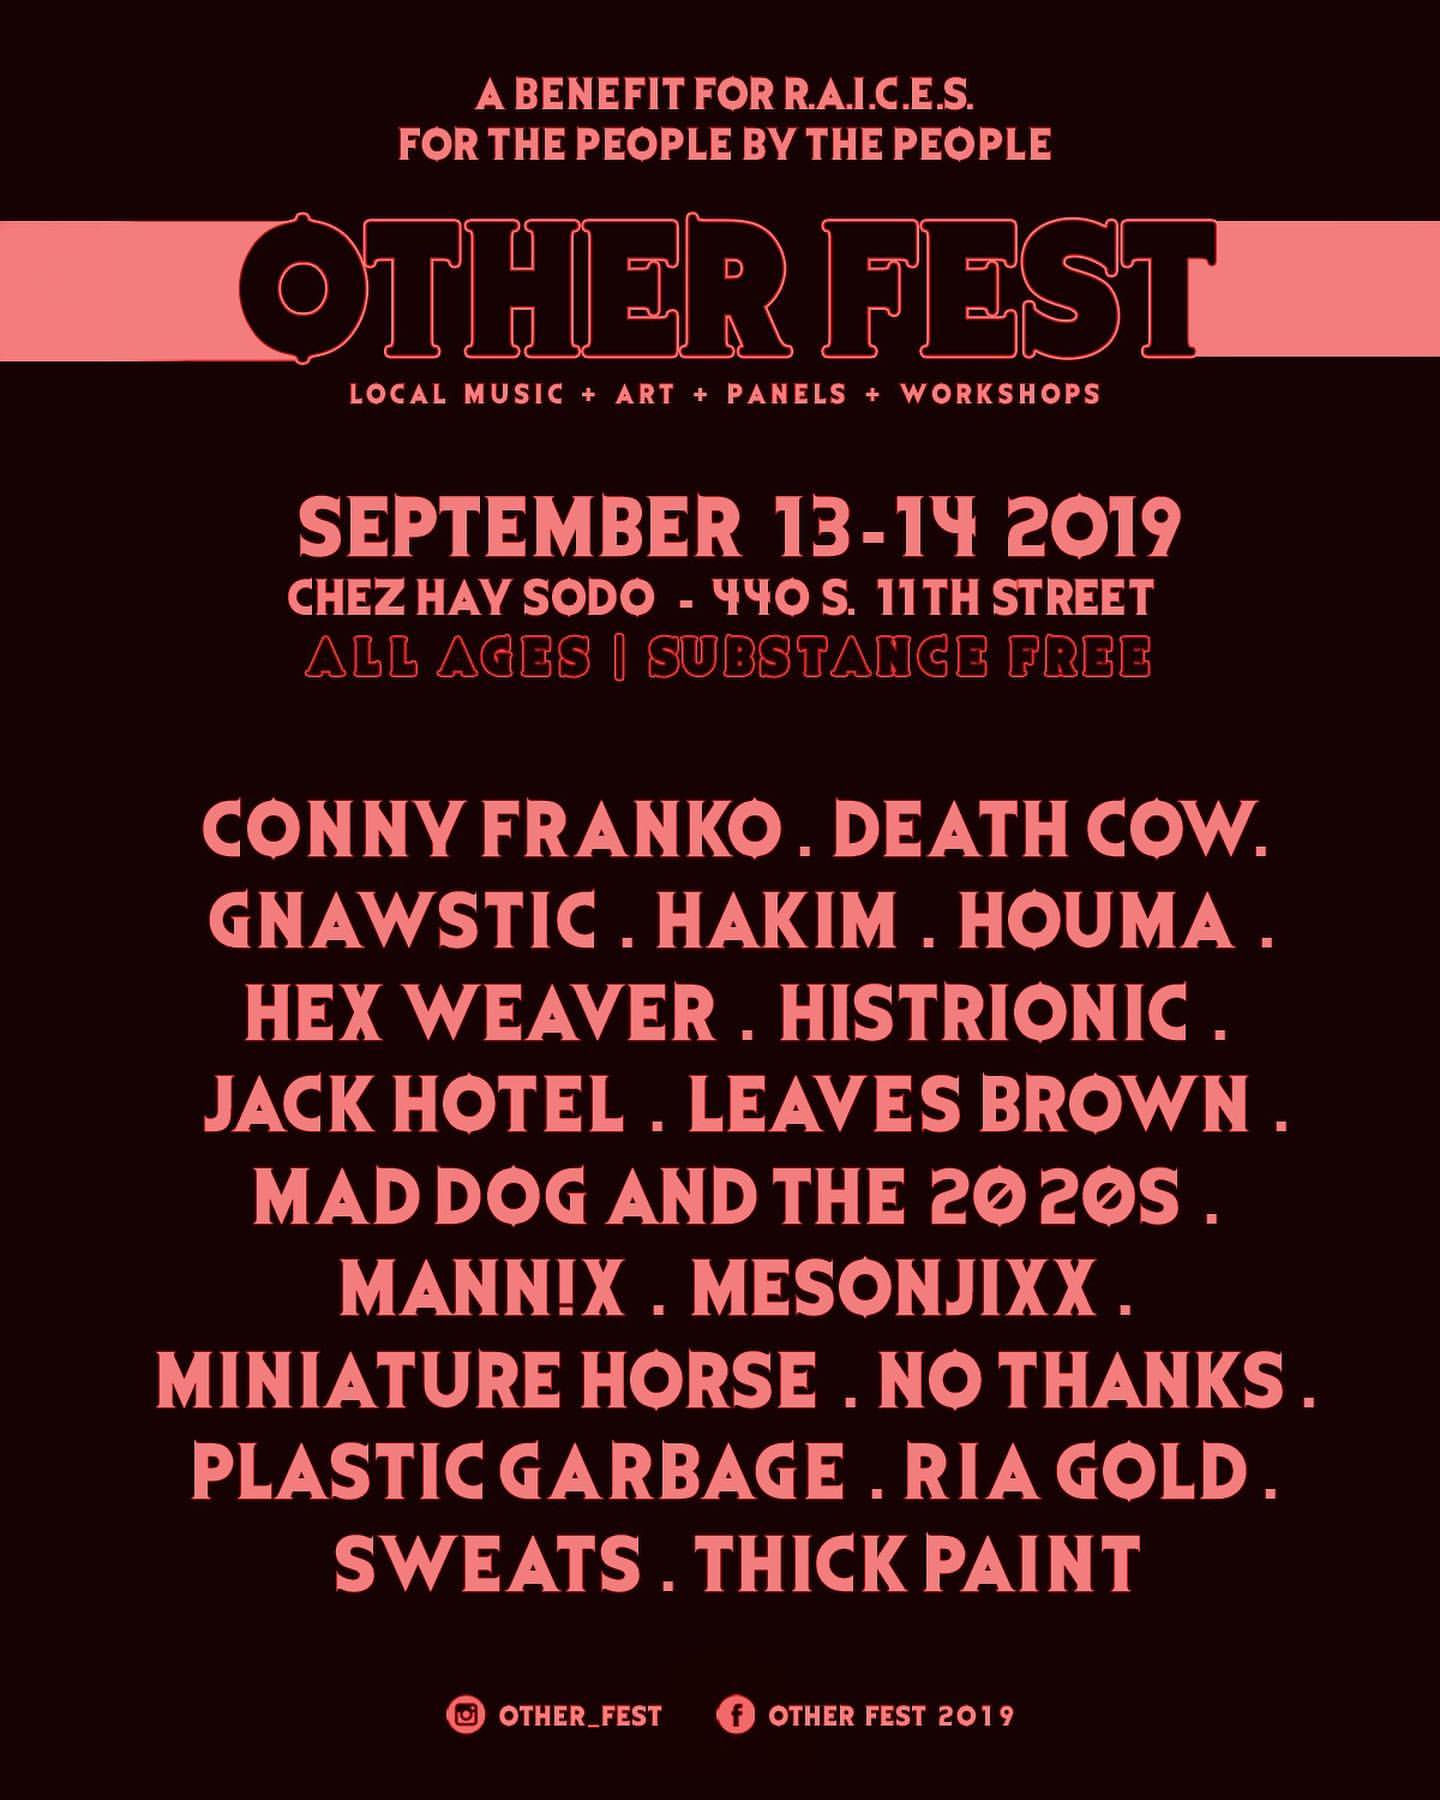 Other Fest 2019